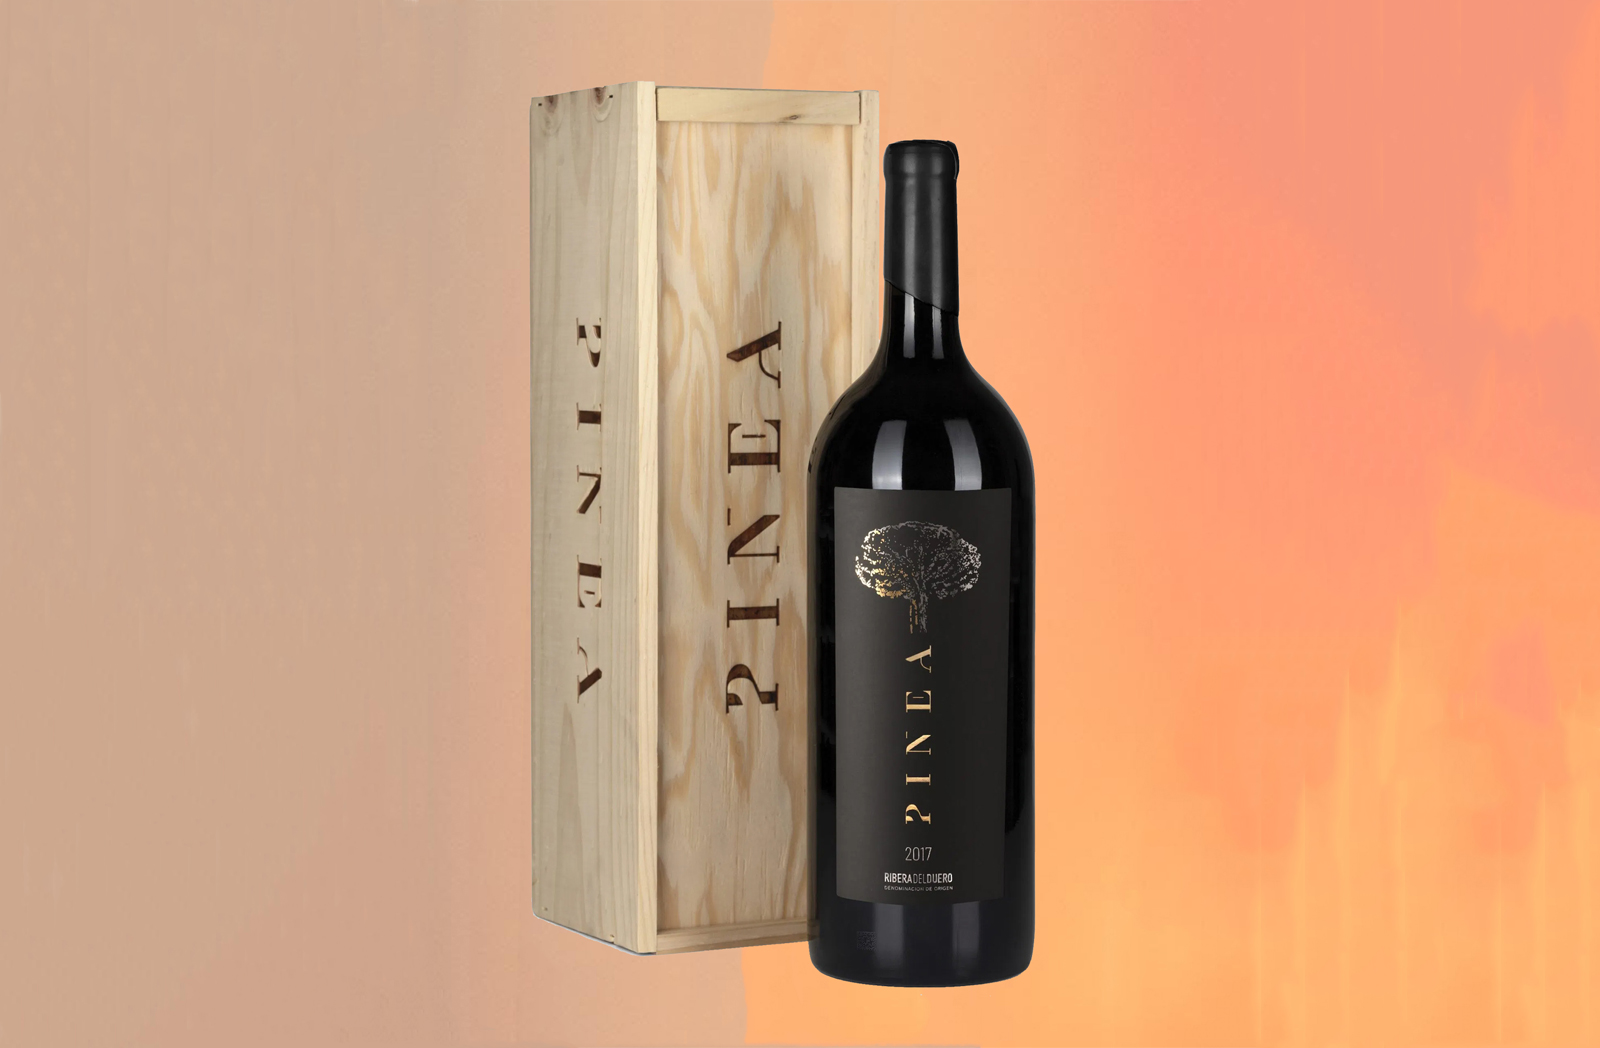 2017 Vintage Of Pinea Tempranillo wine bottle and crate